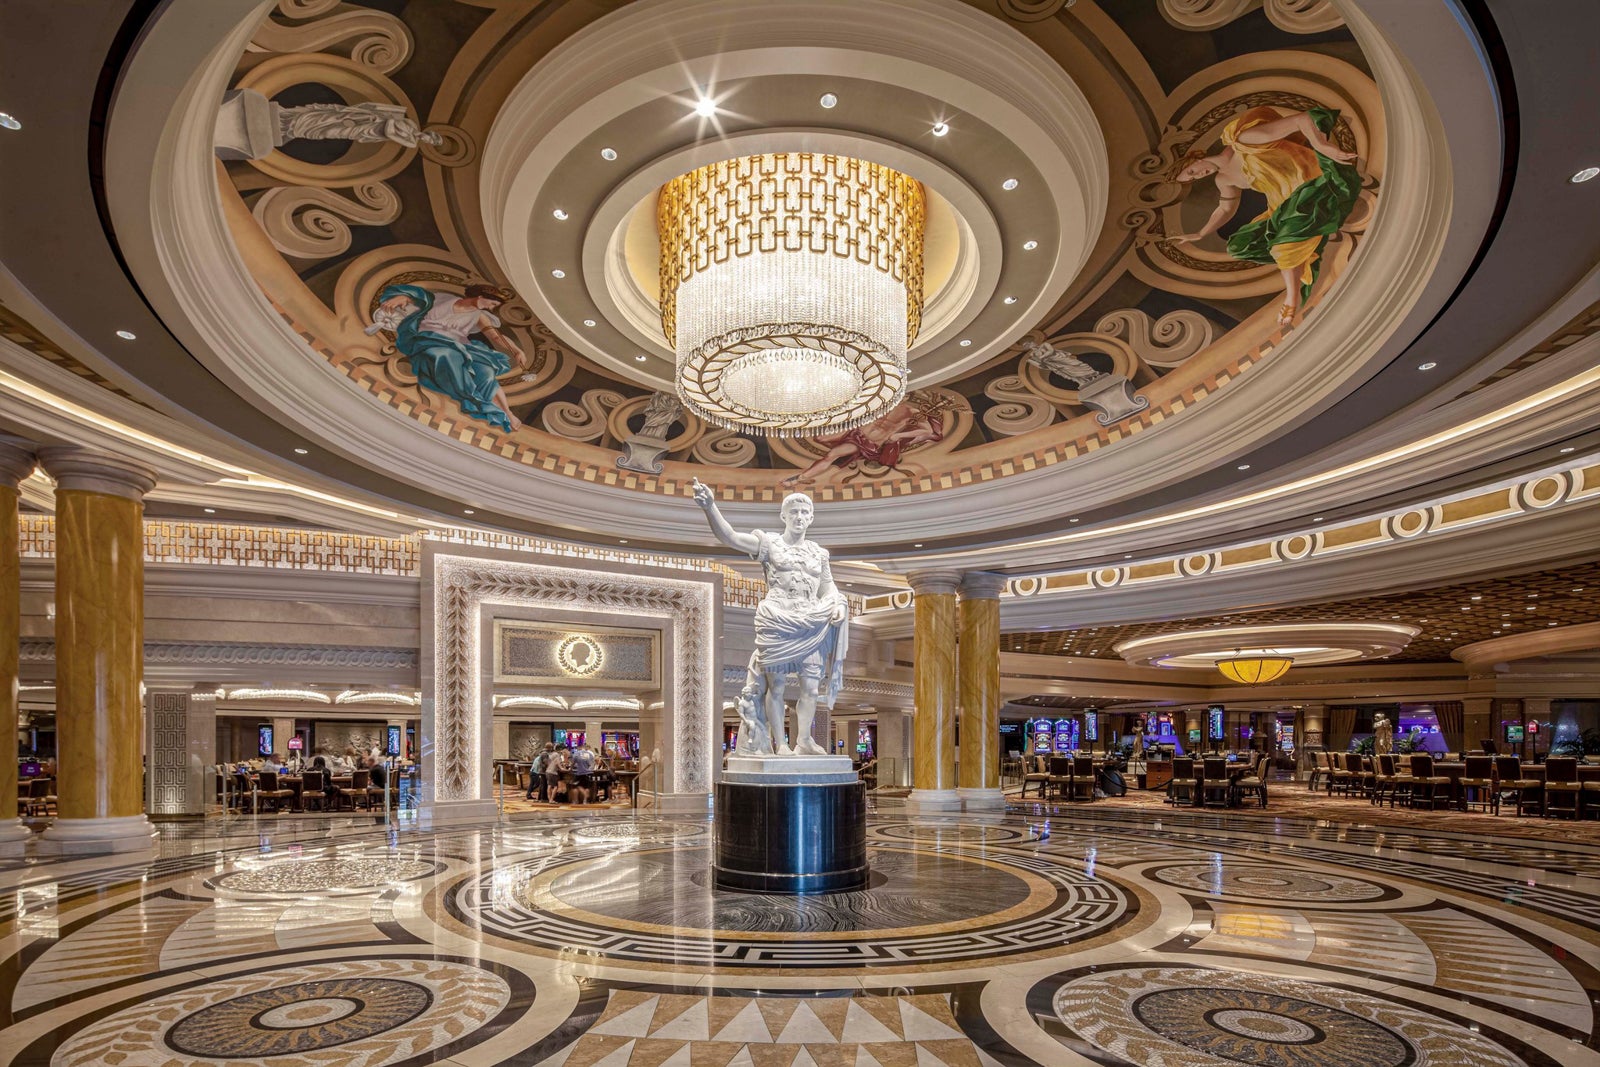 10 Marriott Hotels In Las Vegas That Showcase Unrivaled Luxury And  Hospitality